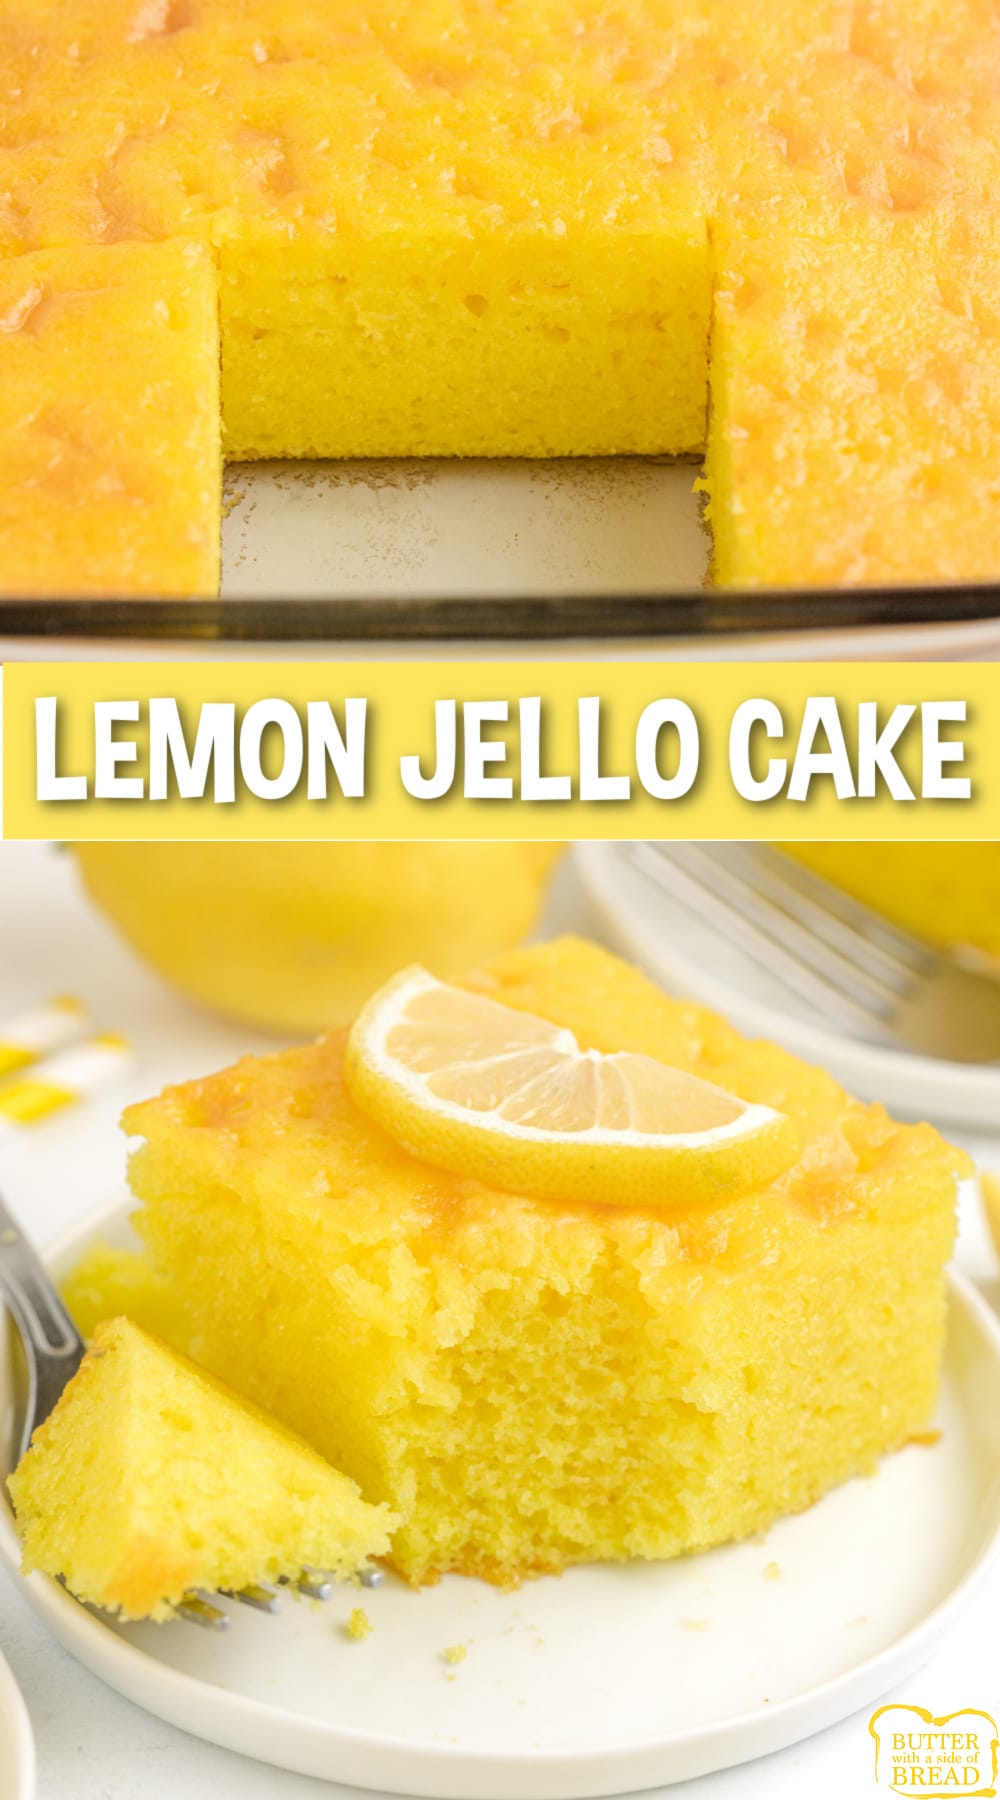 Lemon Jello Cake is easy to make and packed with tons of lemon flavor! This delicious cake is made with a lemon cake mix and lemon jello and topped with a simple lemon glaze.